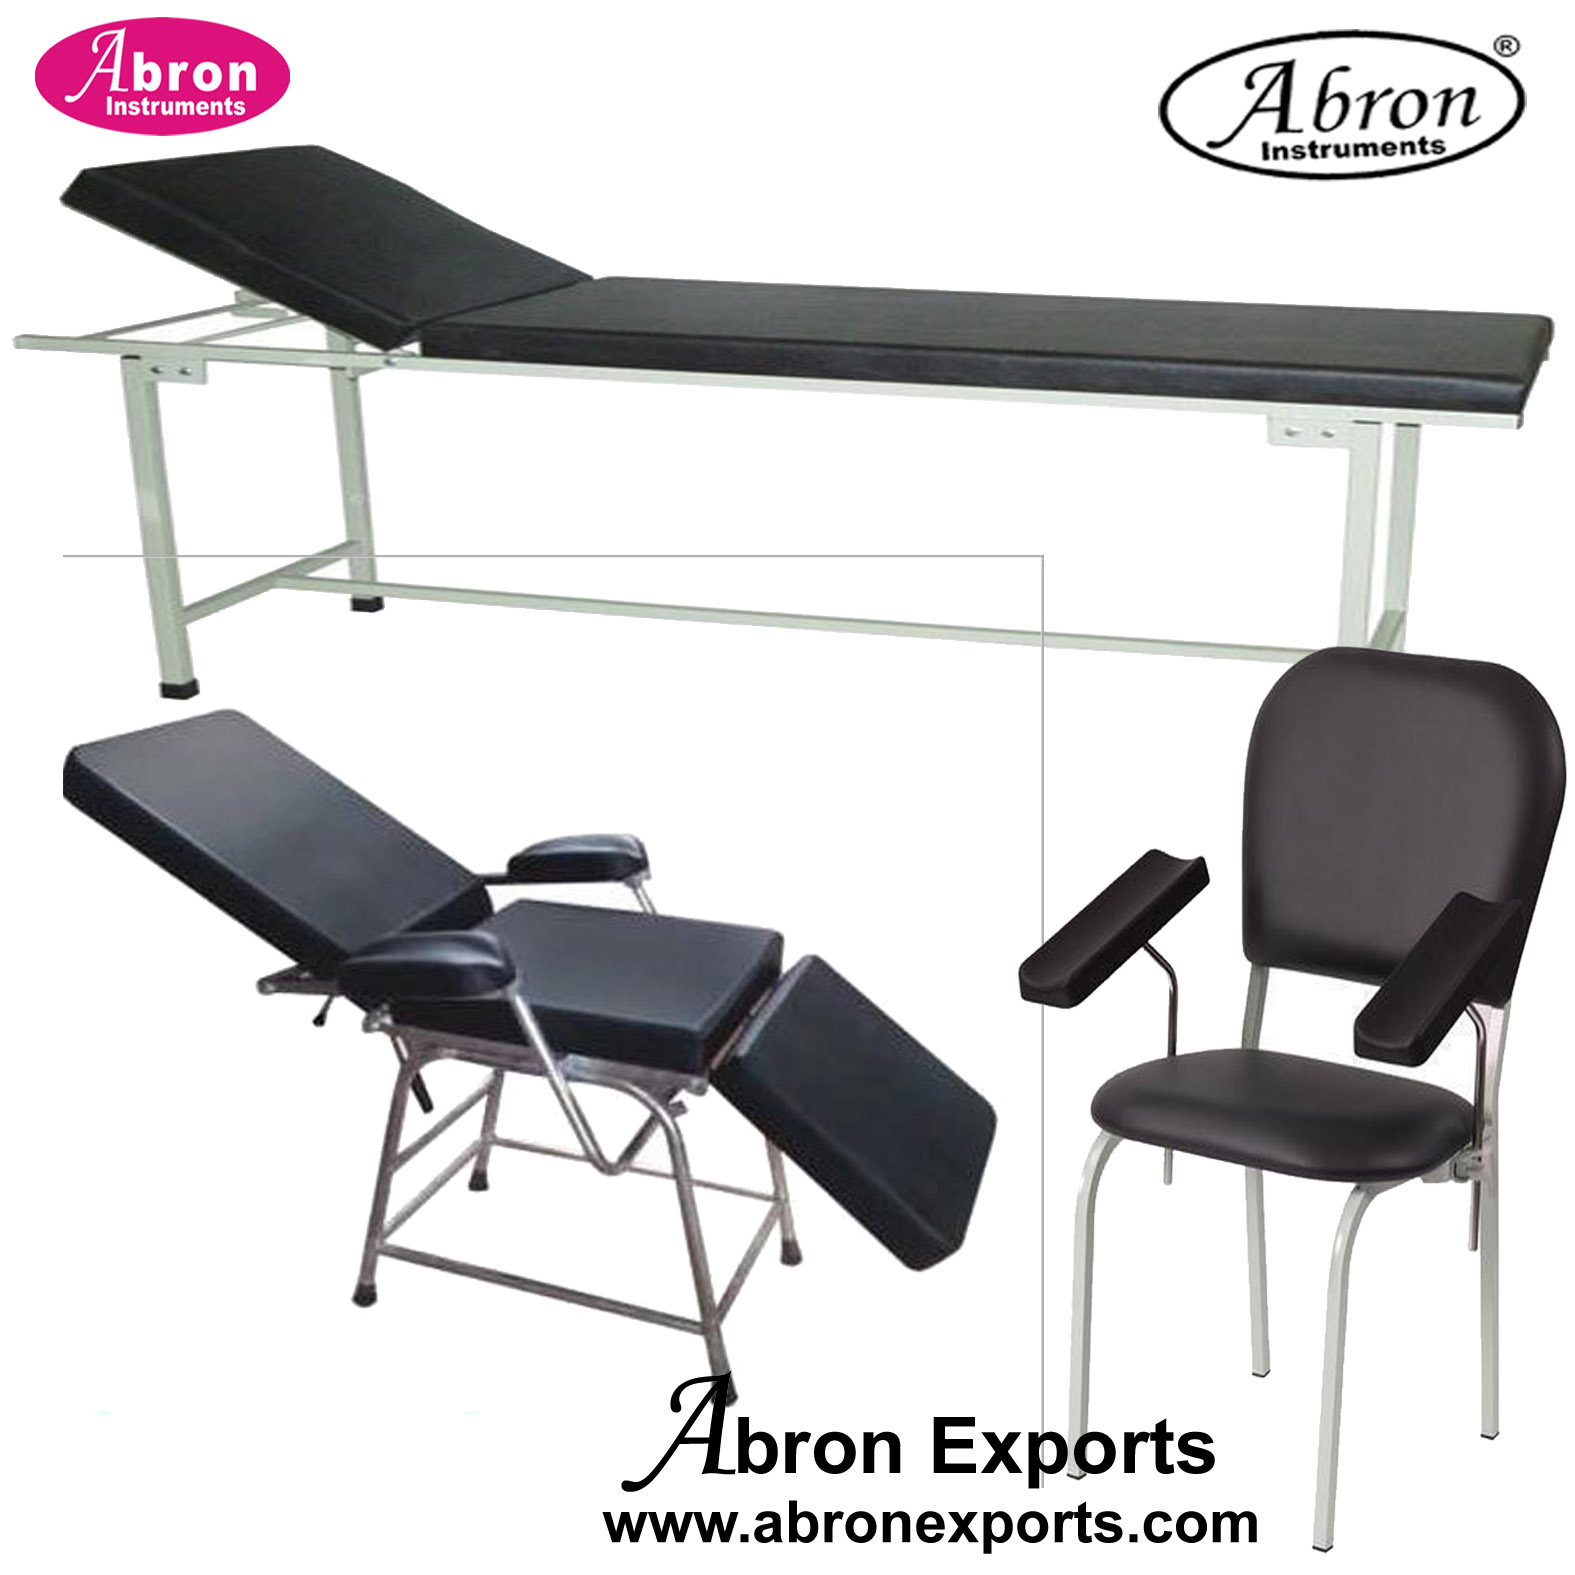 Hospital Blood Bank Collection Stretcher Chair And Chair converable Surgical Medical Nursing Home Abron ABM-2275BMD 